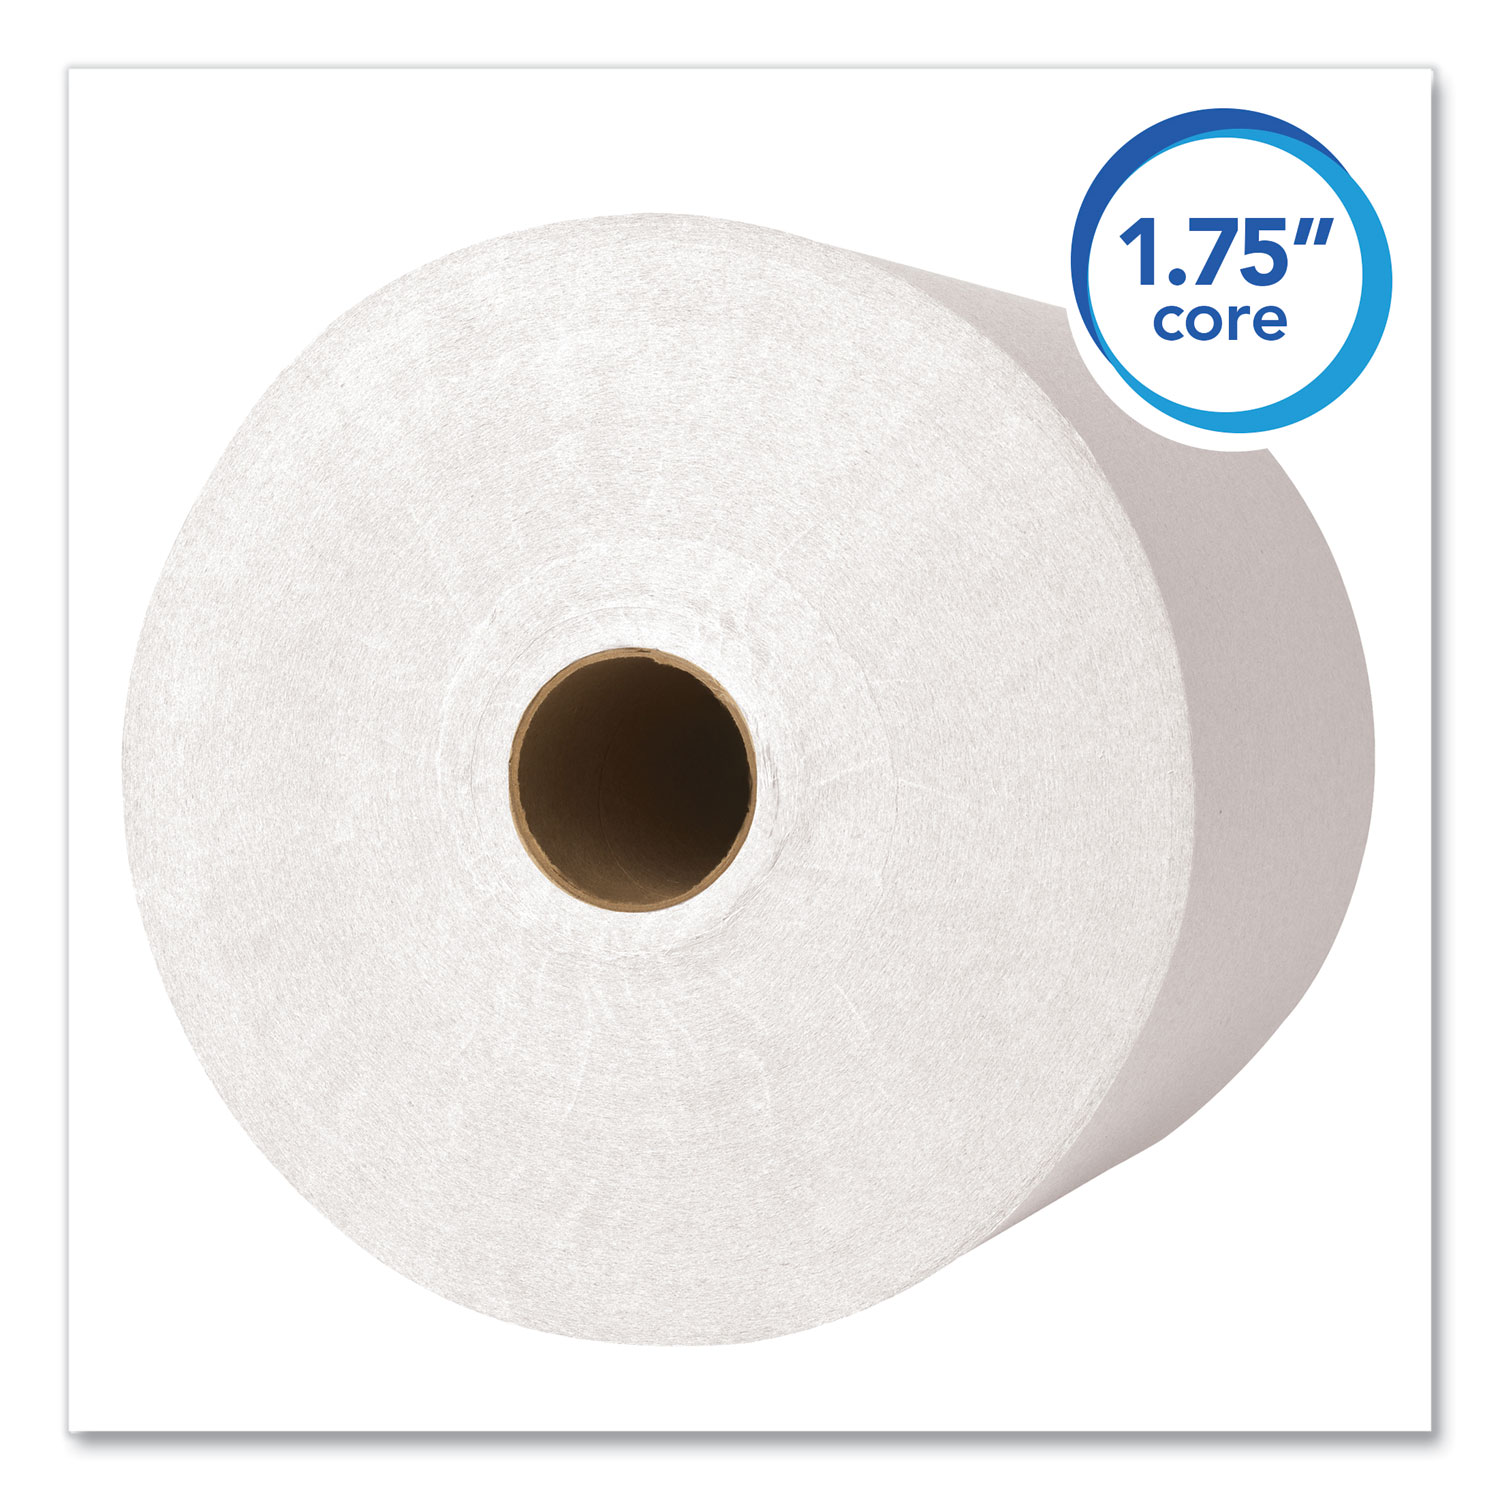 Scott Essential High Capacity Hard Roll Towels for Business, 1.75" Core, 8 x 950 ft, White,6 Rolls/CT -KCC02000 - image 4 of 7